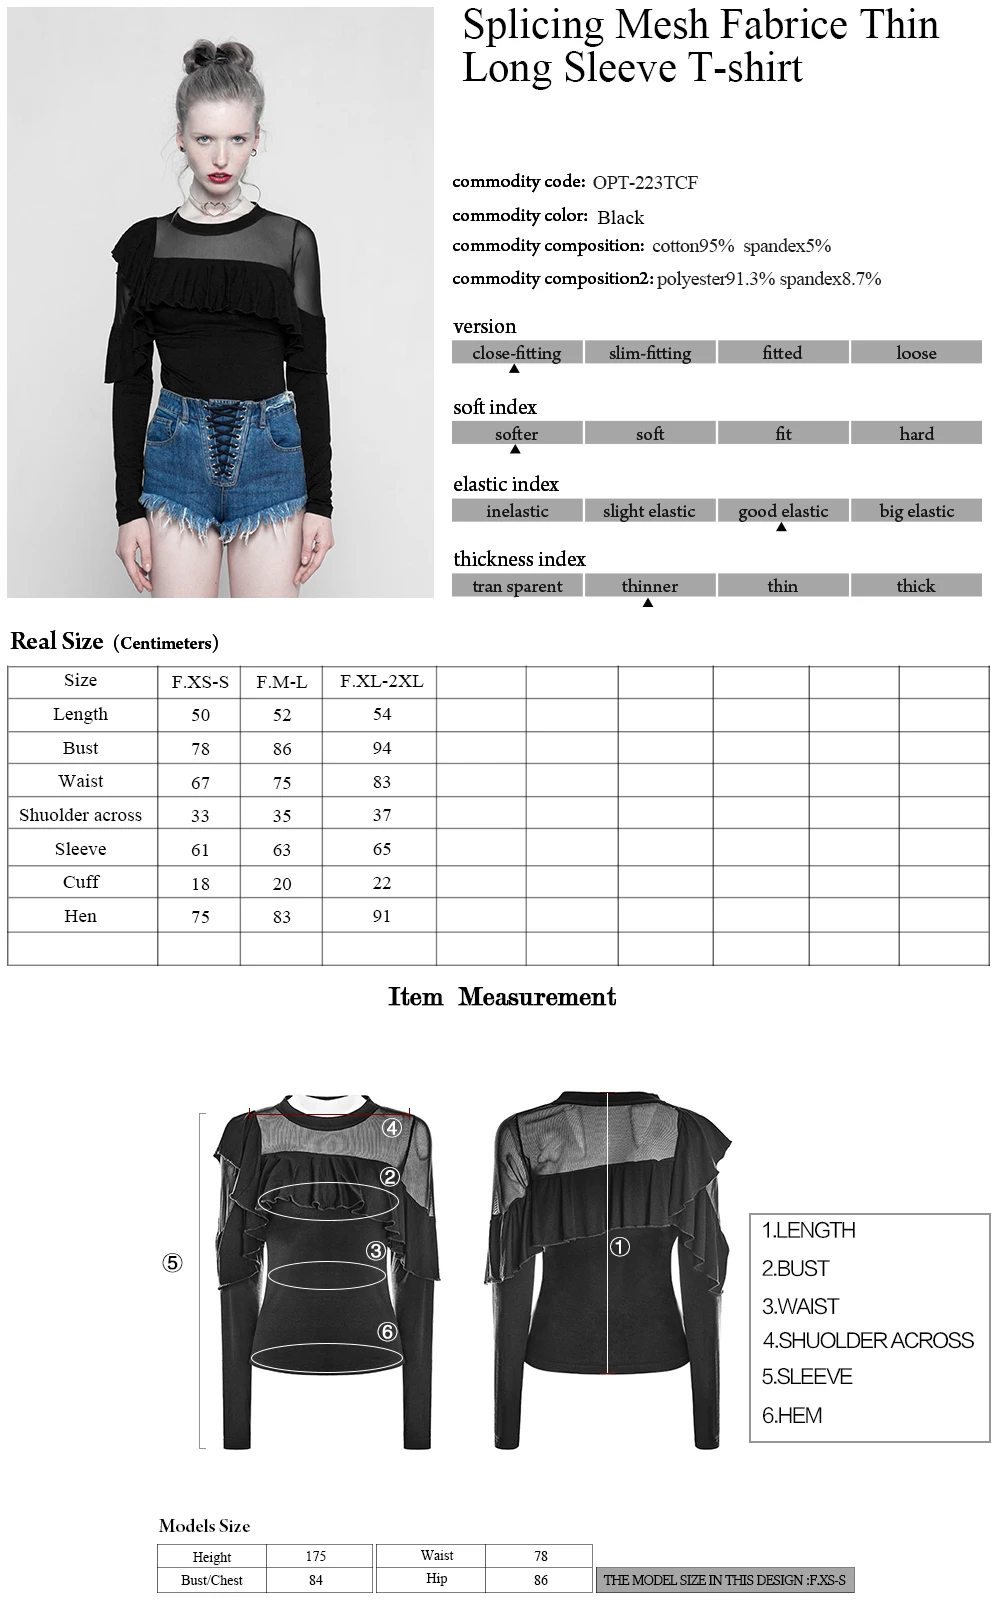 

PUNK RAVE Women's Dark Splicing Mesh Fabrice Thin Long Sleeve T-shirt Breathable Cotton Knit Personality Handsome Women Tops